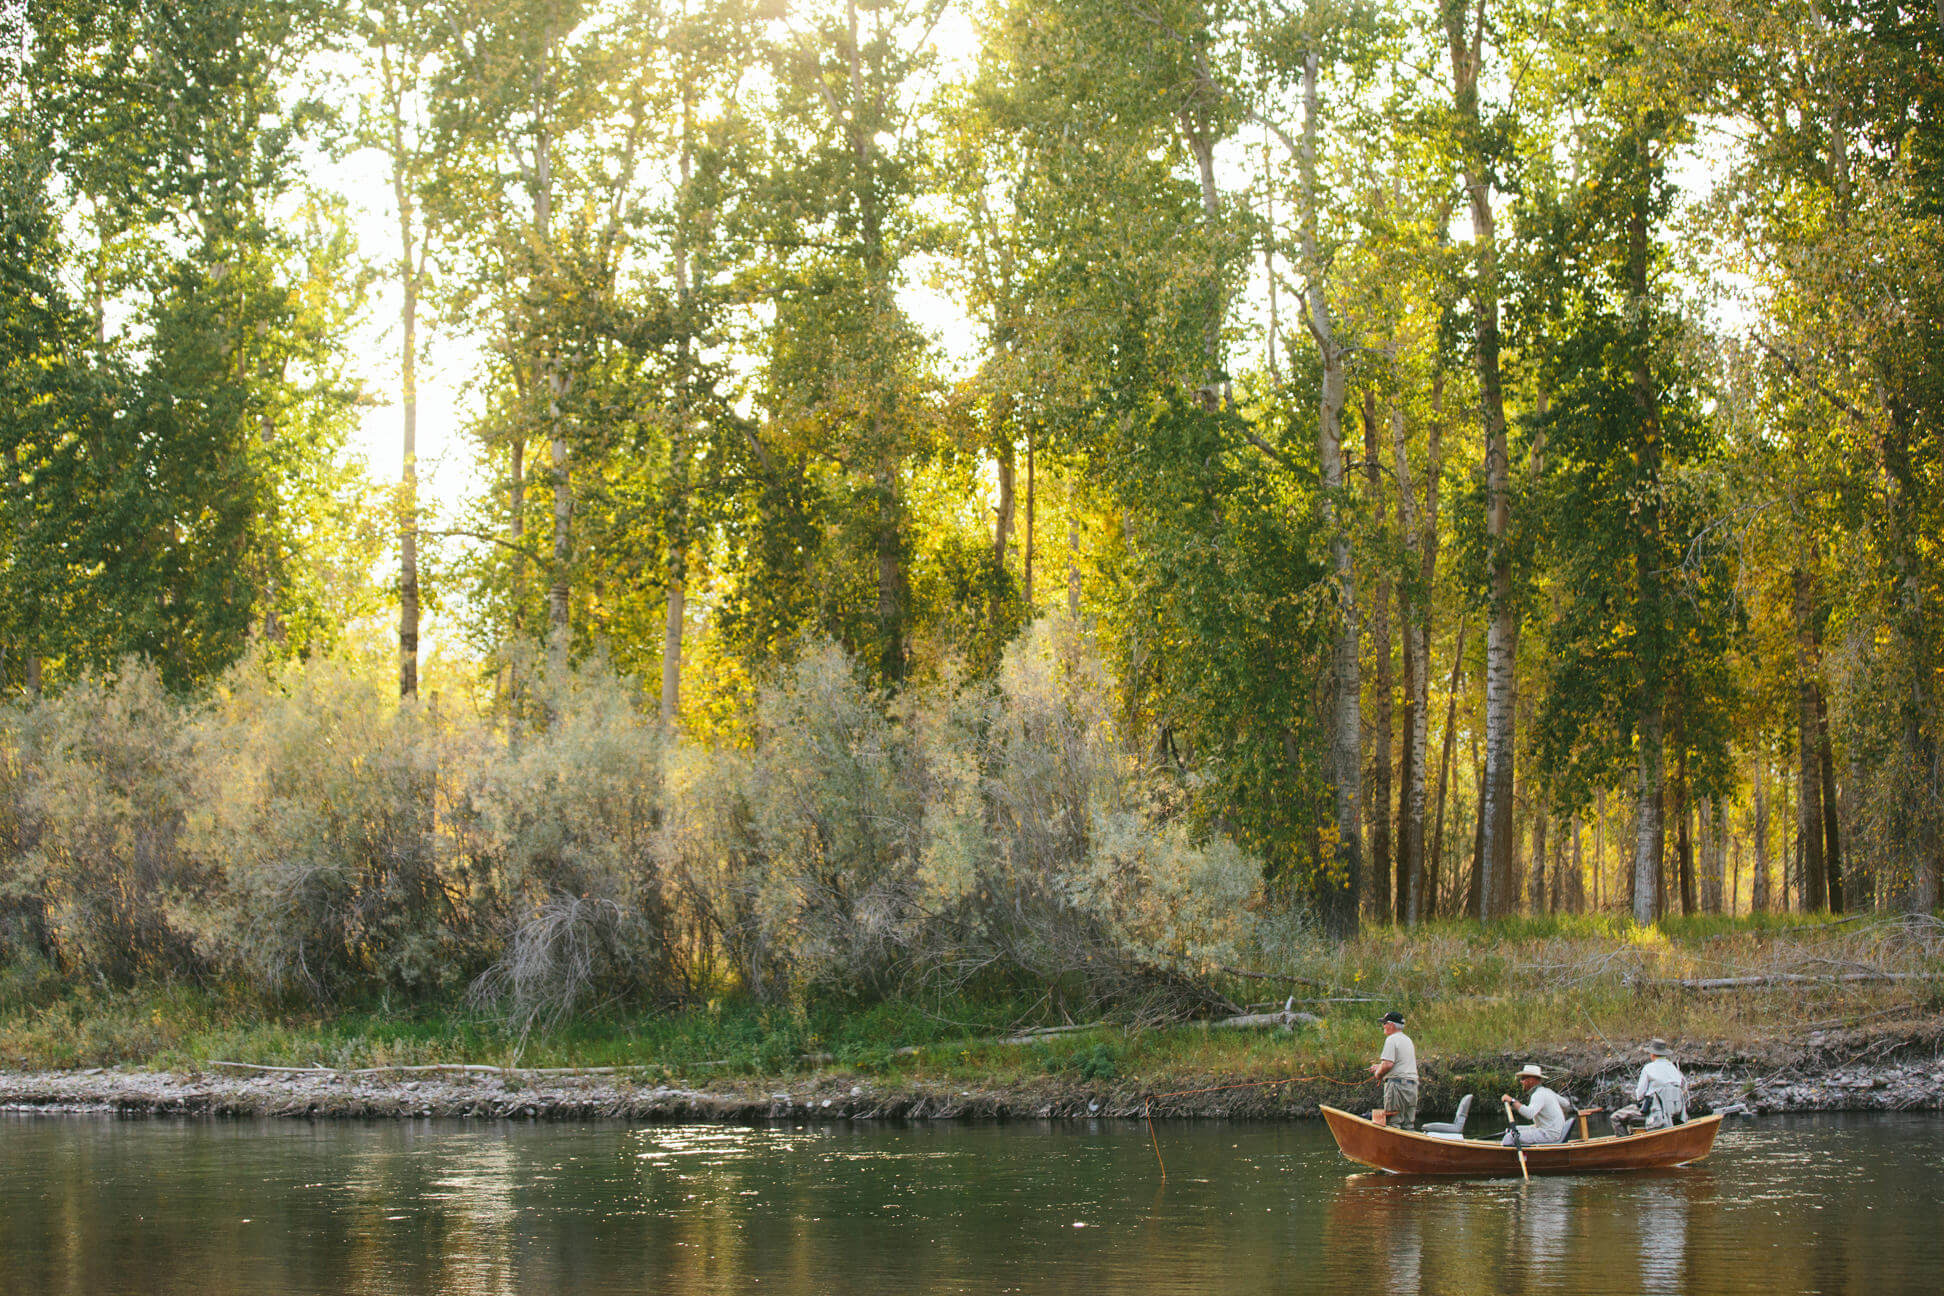 Fishermen row their boat along the Bitterroot River in Missoula Montana